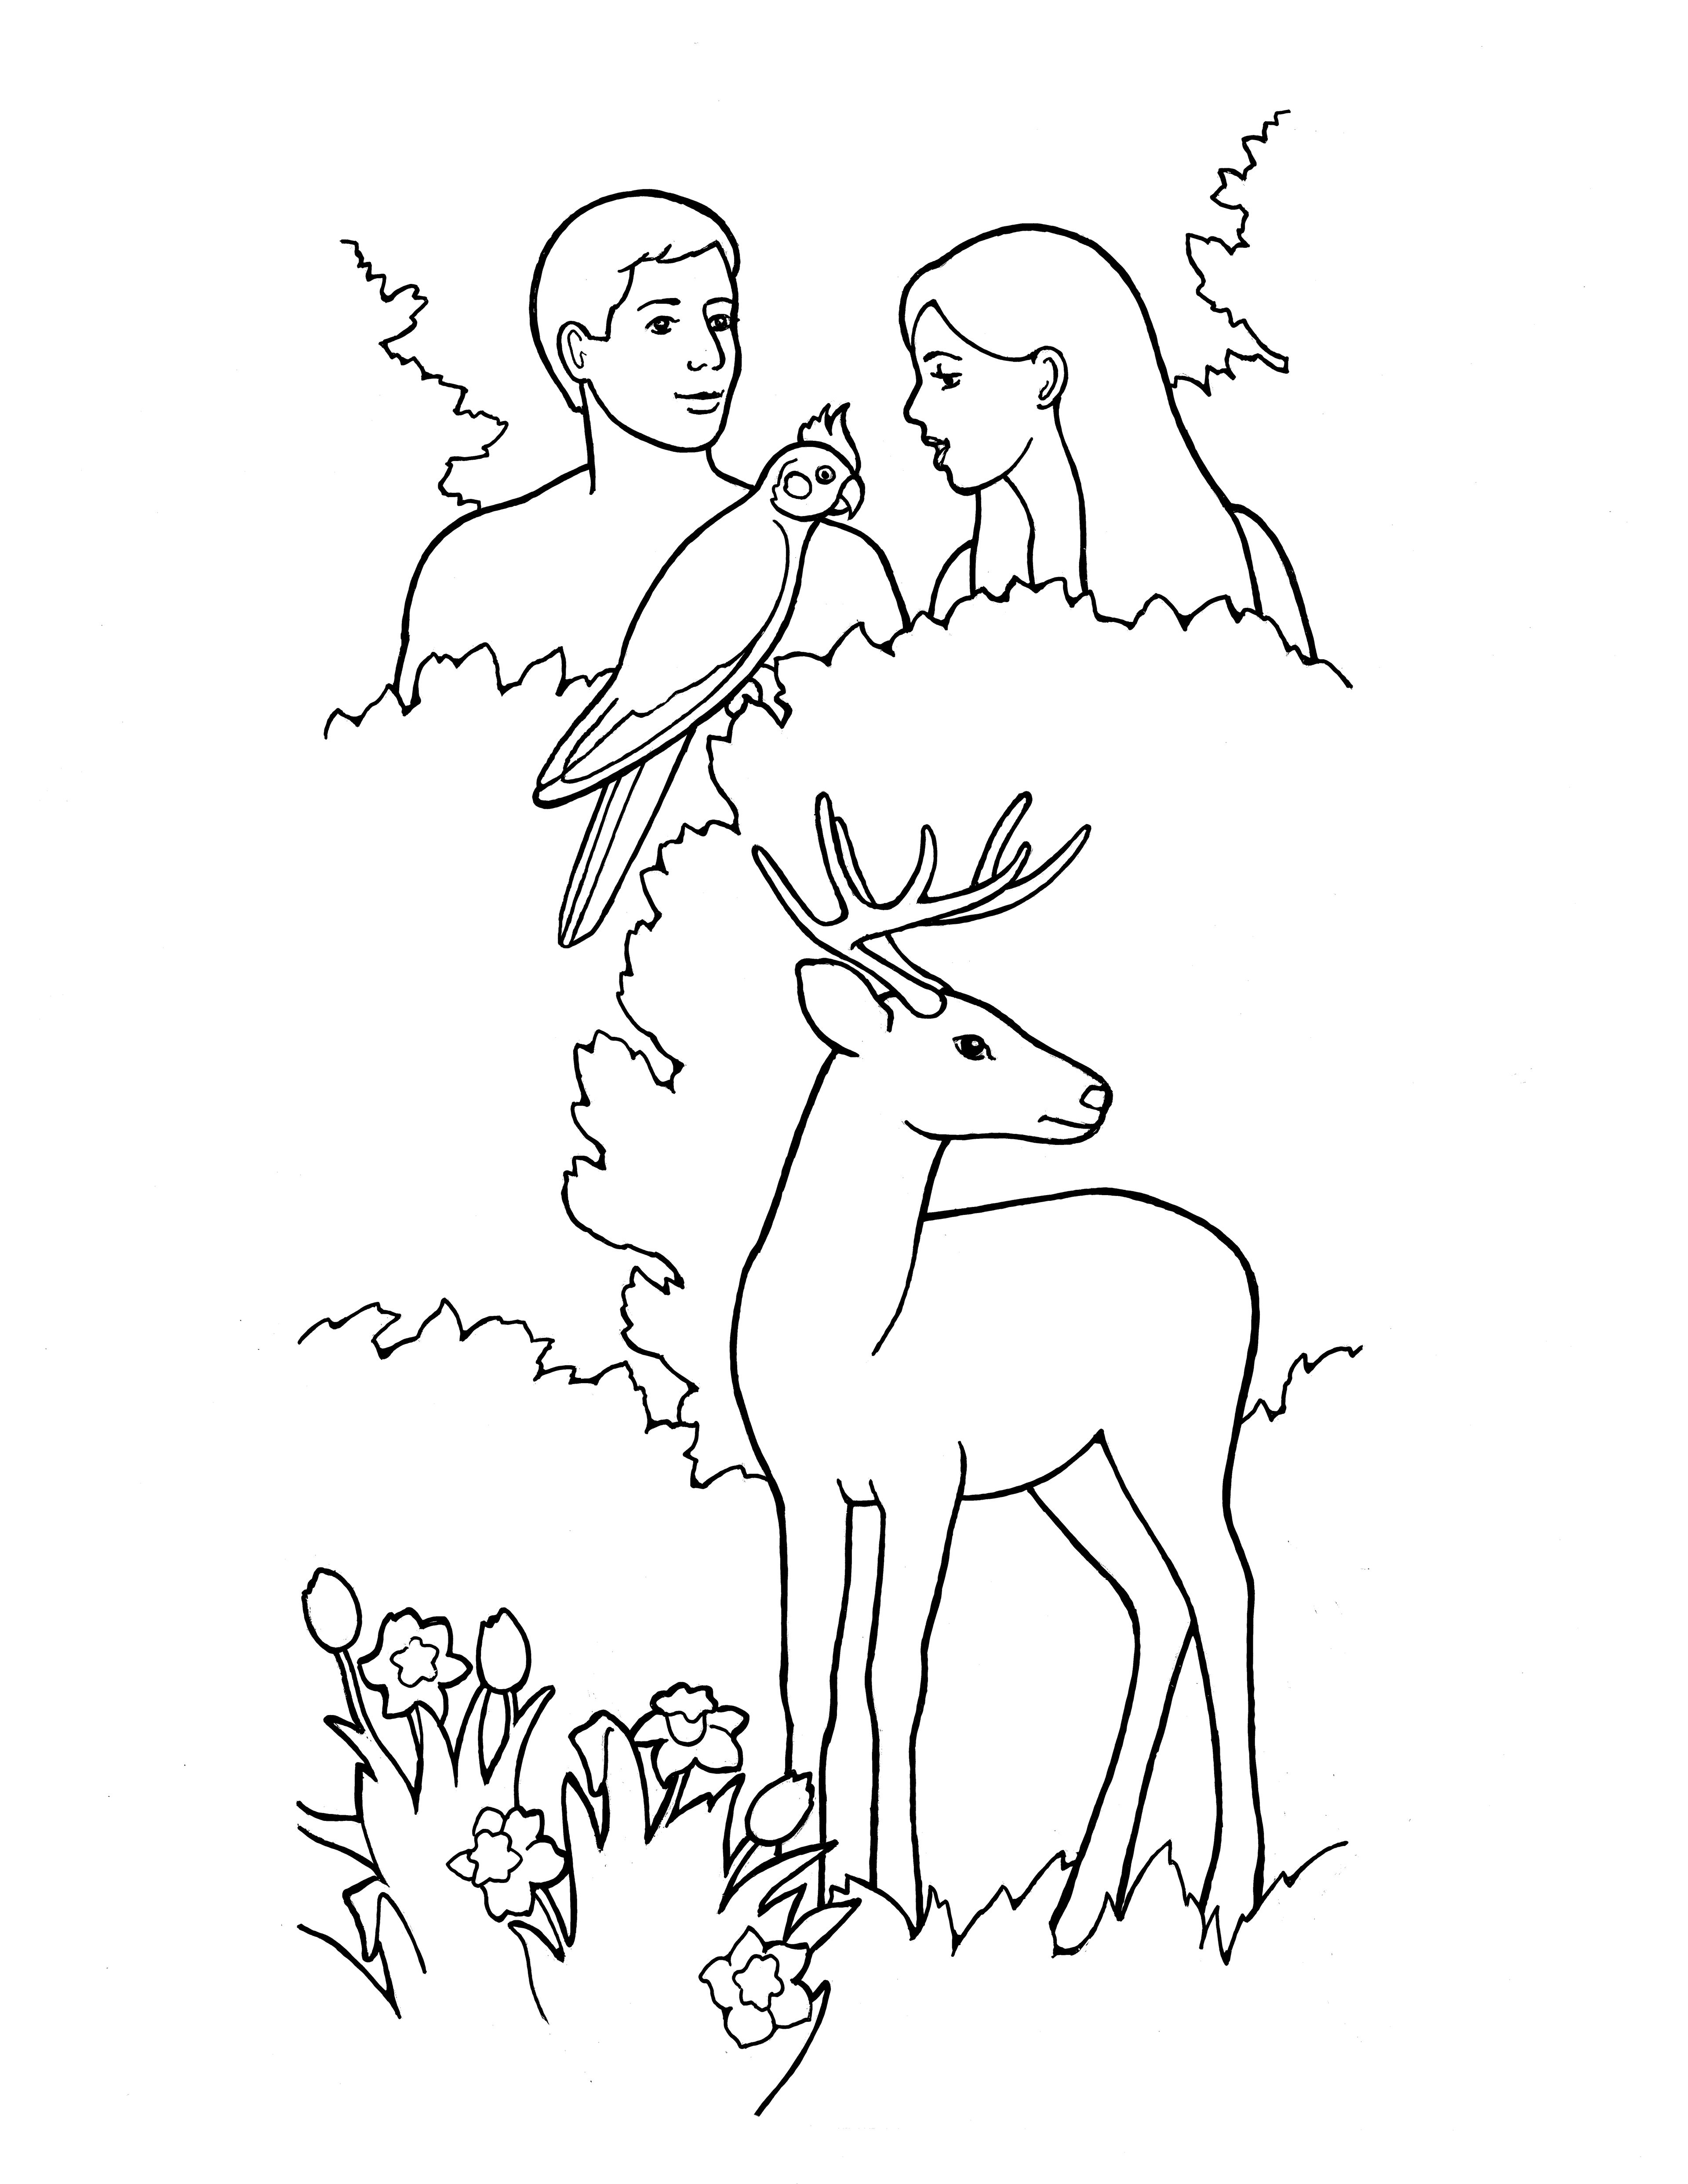 adam and eve lds coloring pages